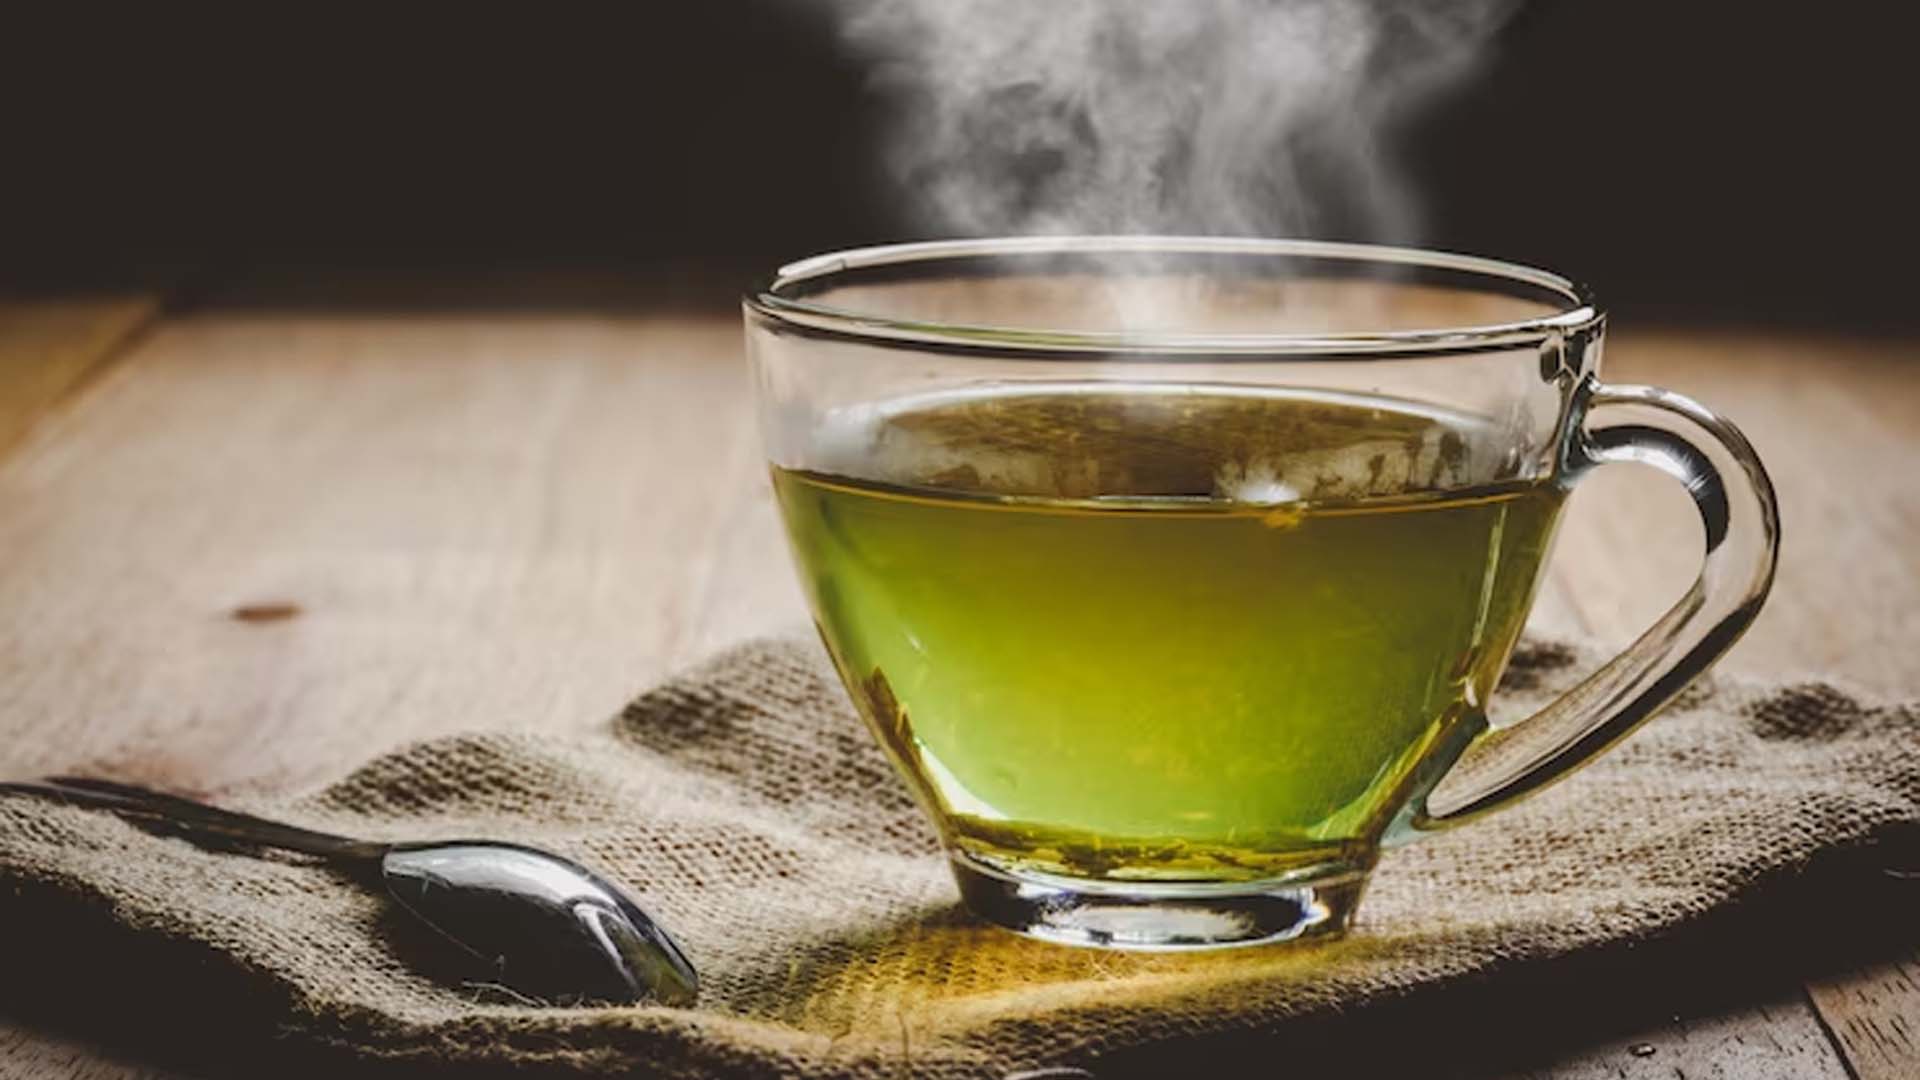 Can Green Tea Cause Miscarriage?